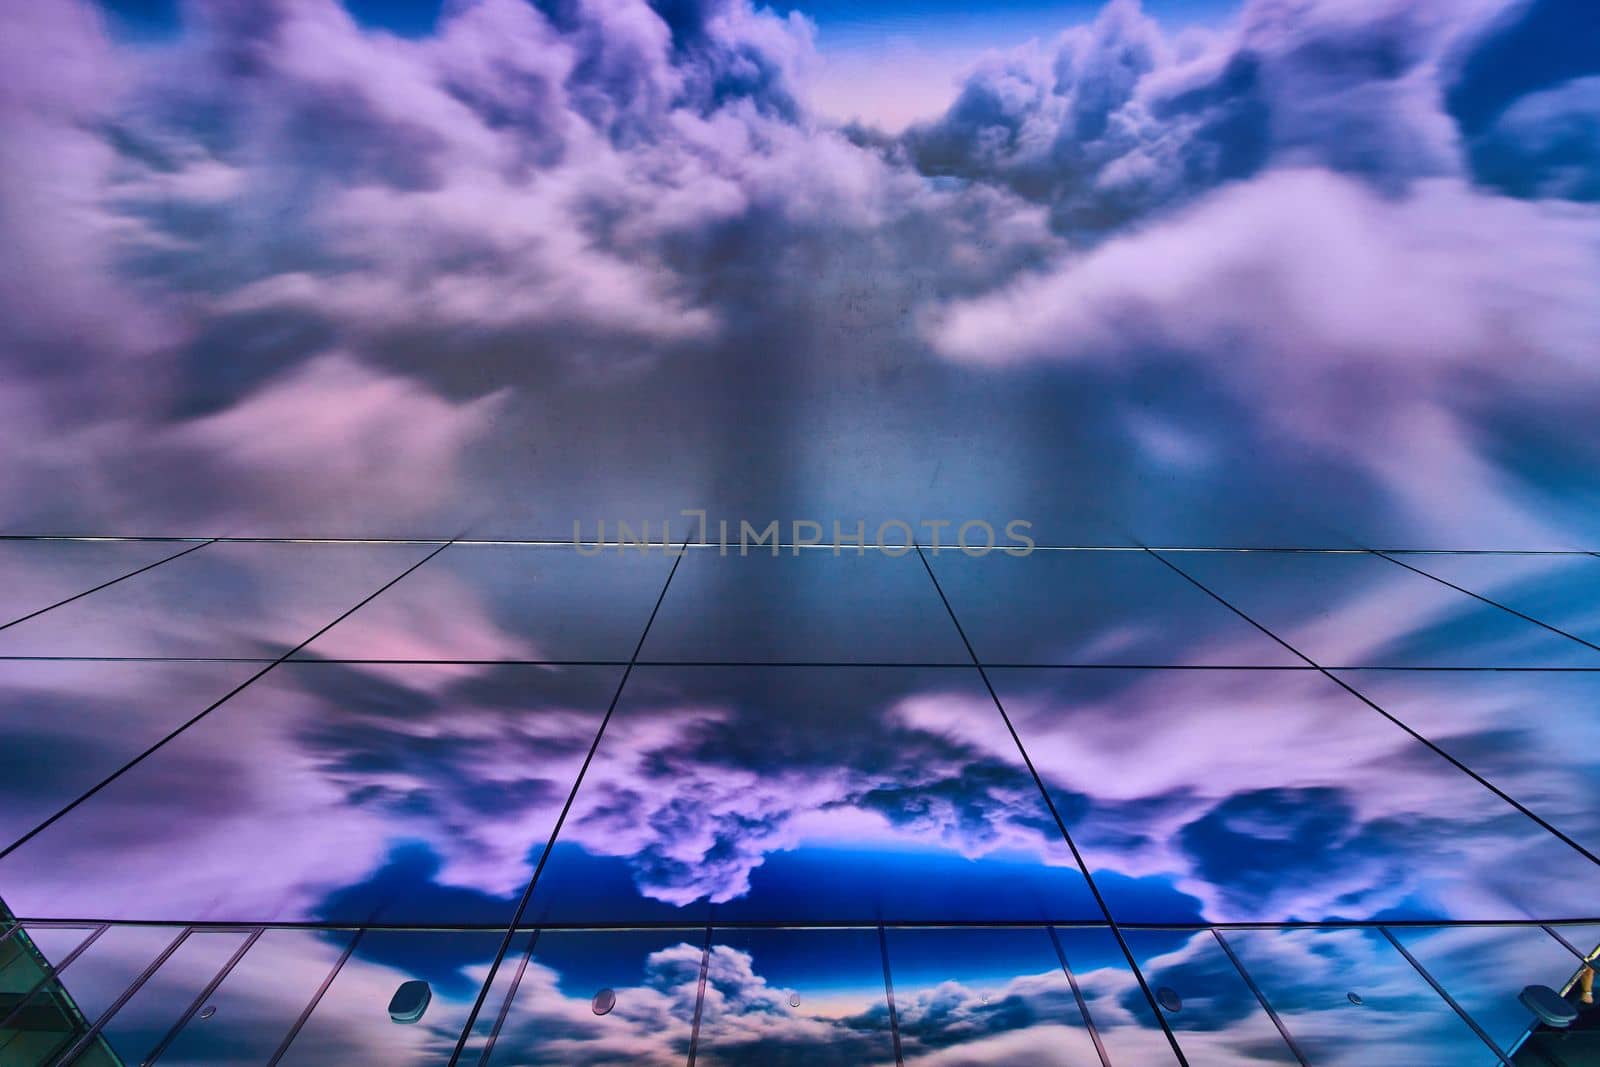 Image of Mirror wall and augmented reality of storm clouds on glass